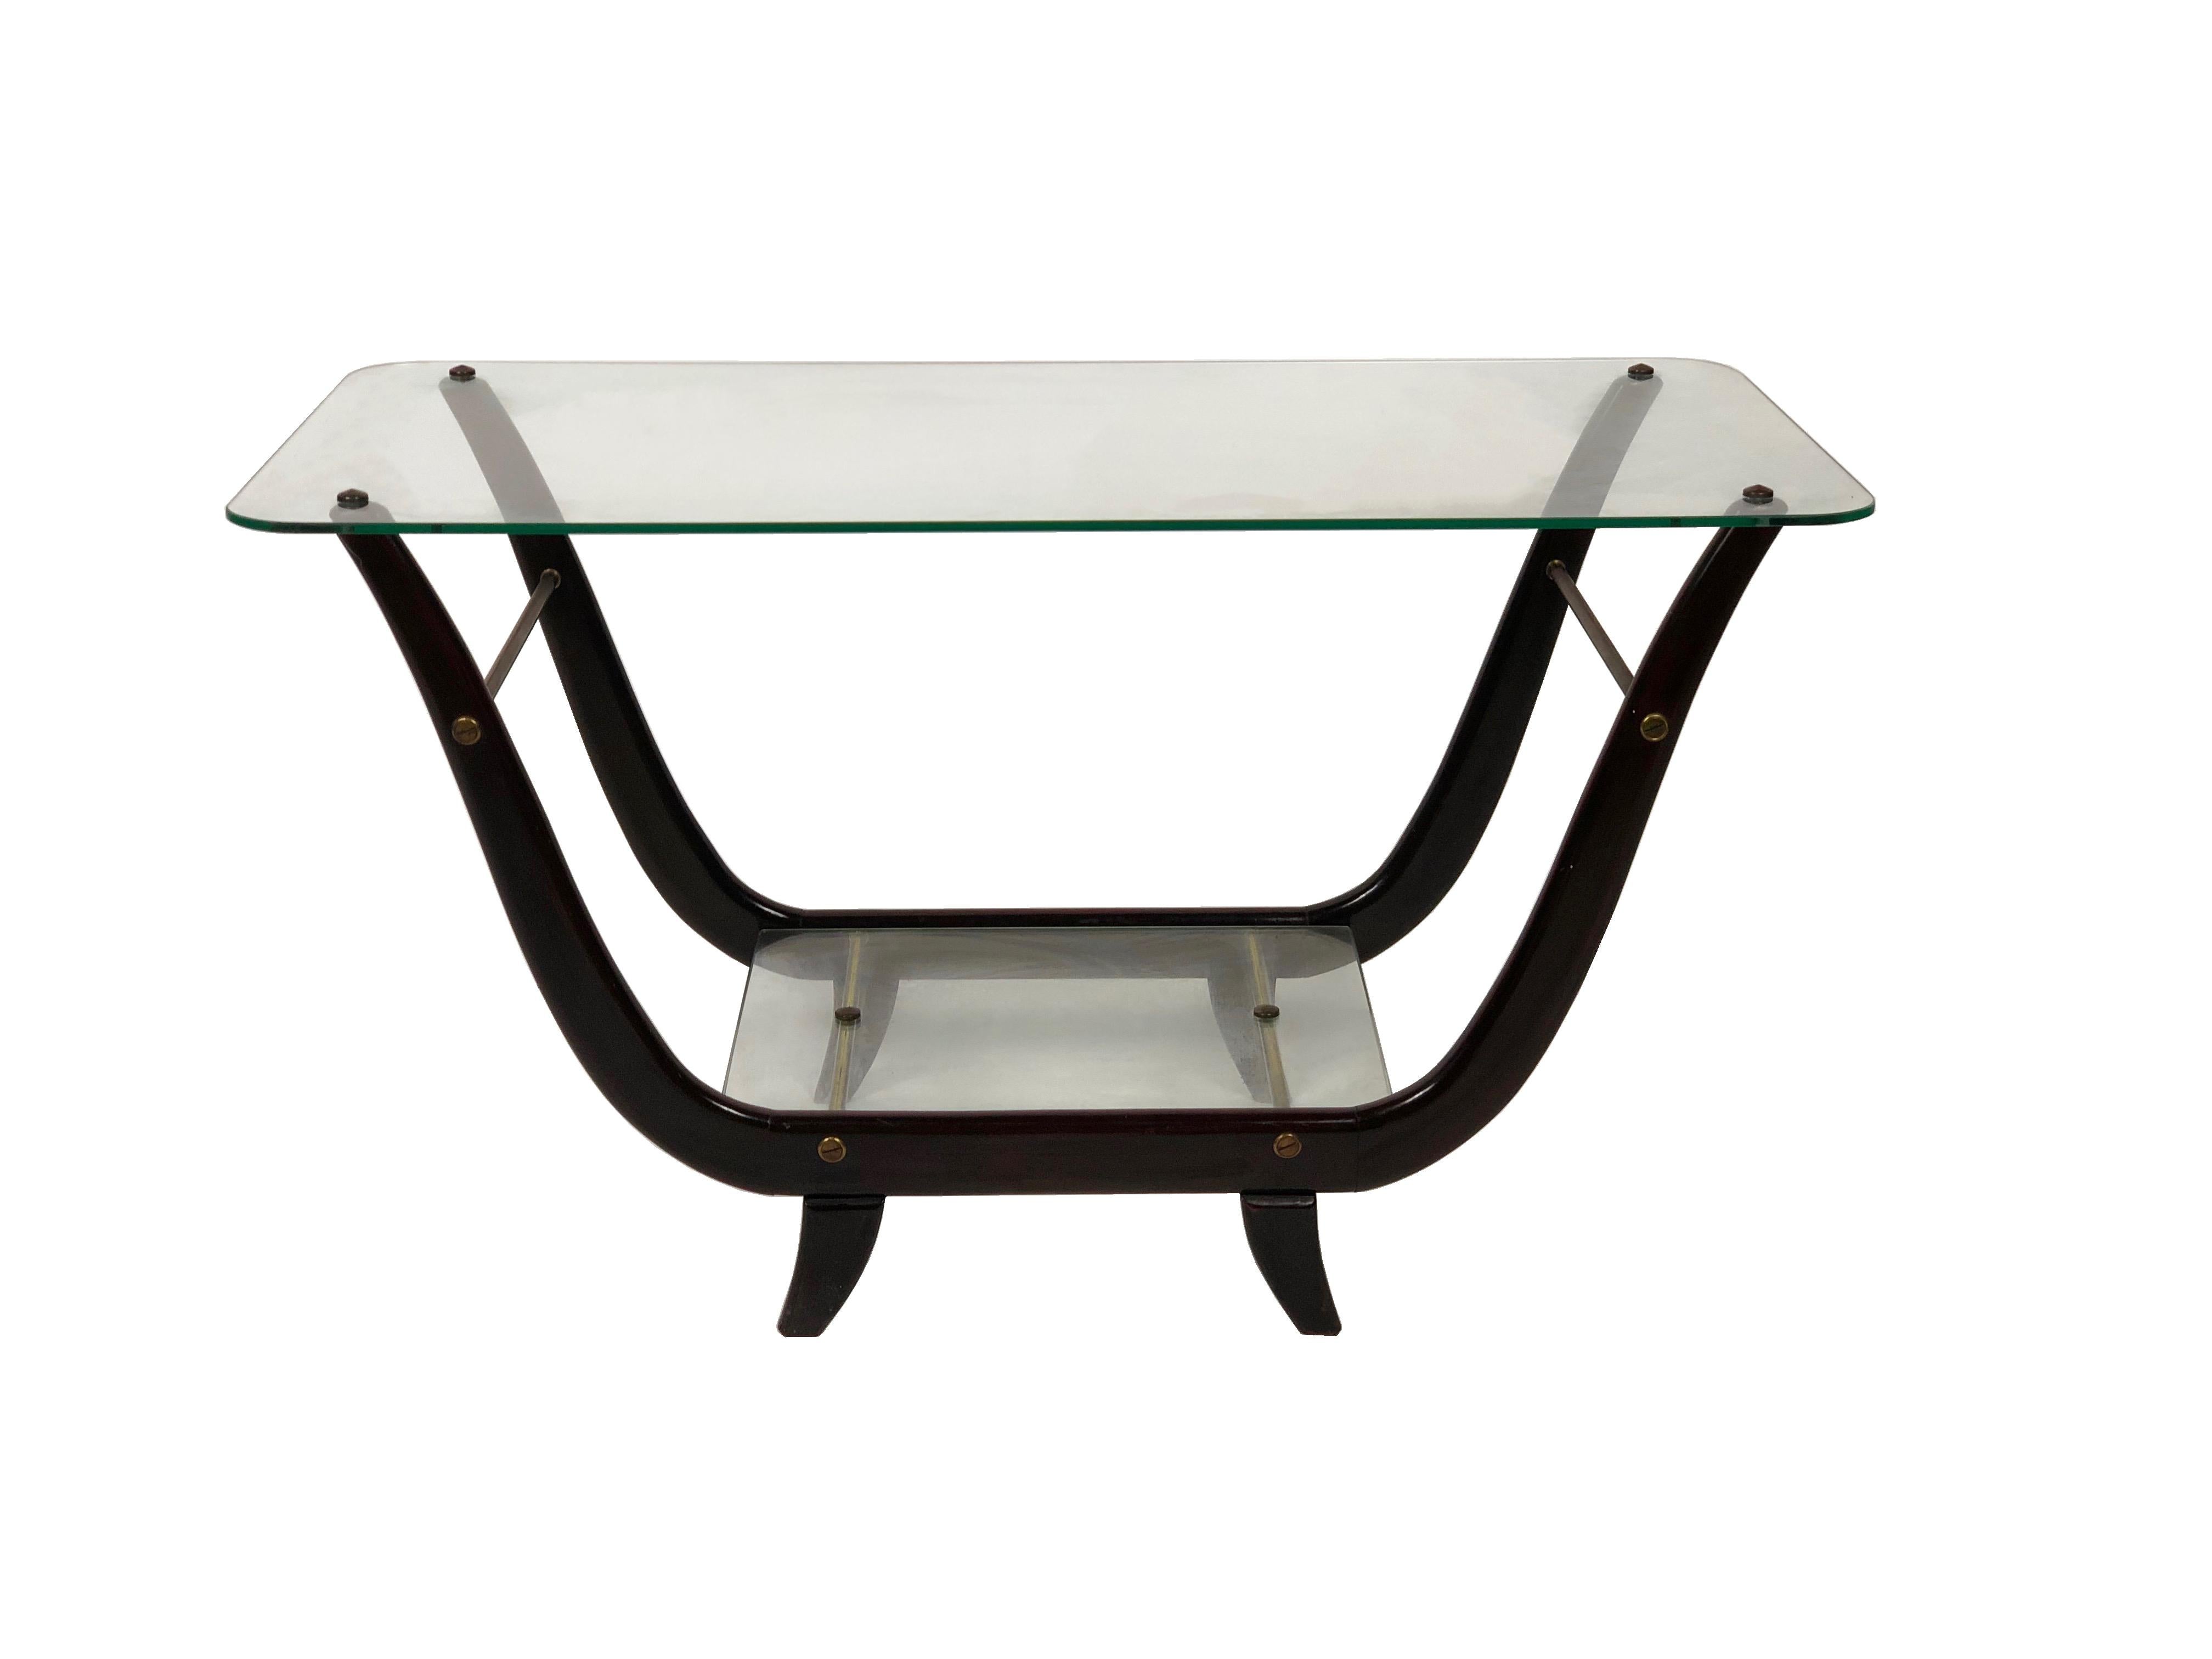 Splendid coffee table featuring a wooden structure and two shelves of different dimensions, which gives the whole table a trapezium shape. In the style of the Italian designer Gio Ponti, circa 1950.